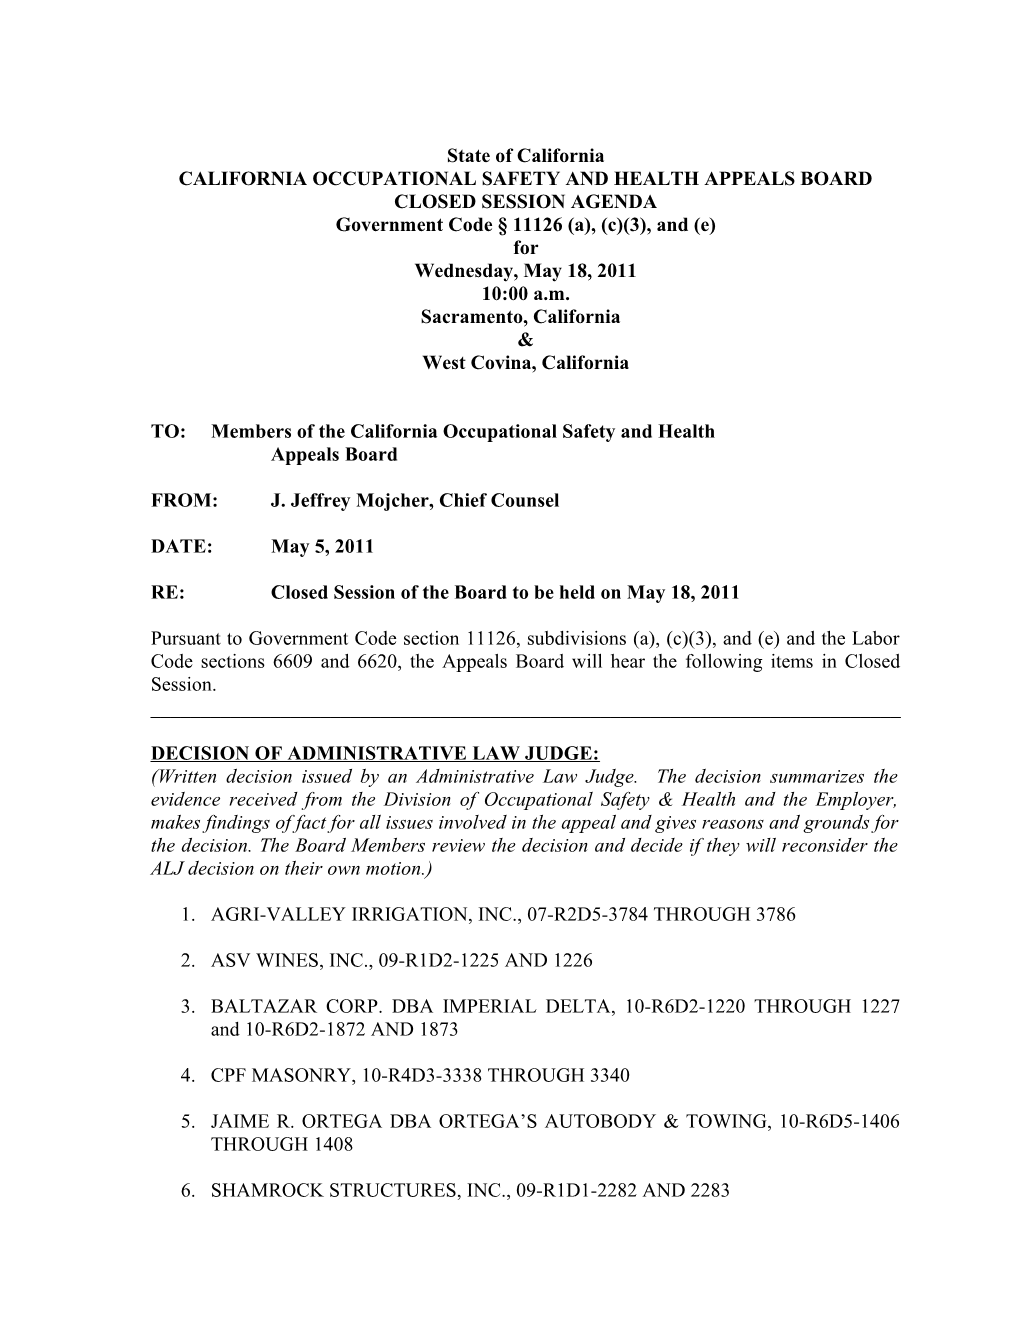 California Occupational Safety & Health Appeals Board s1